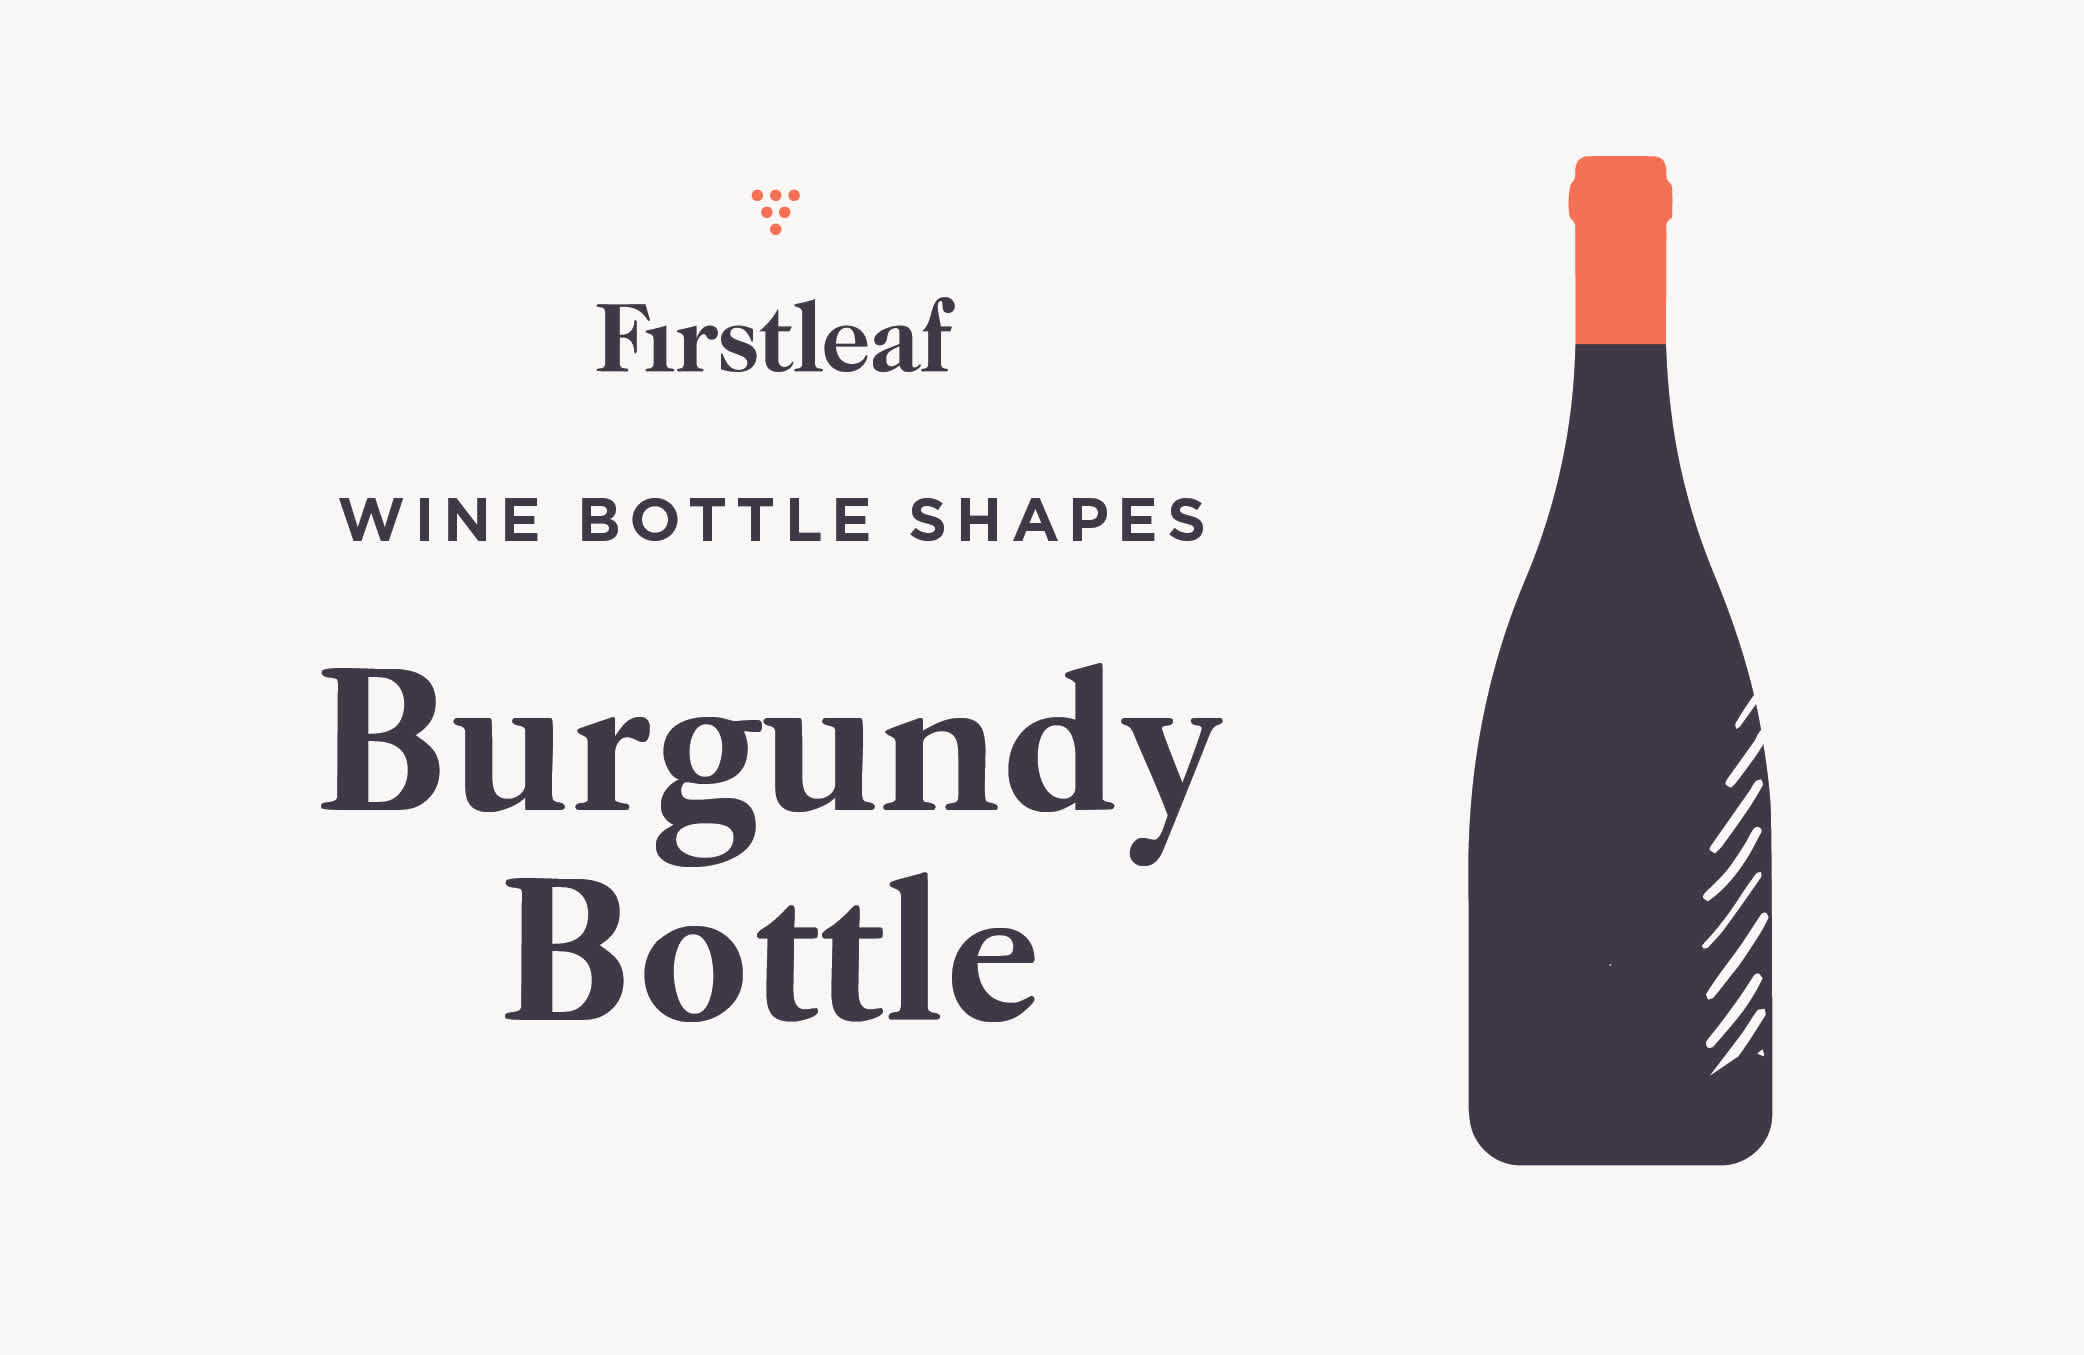 A Visual Guide to All the Different Shapes and Sizes of Wine Bottles